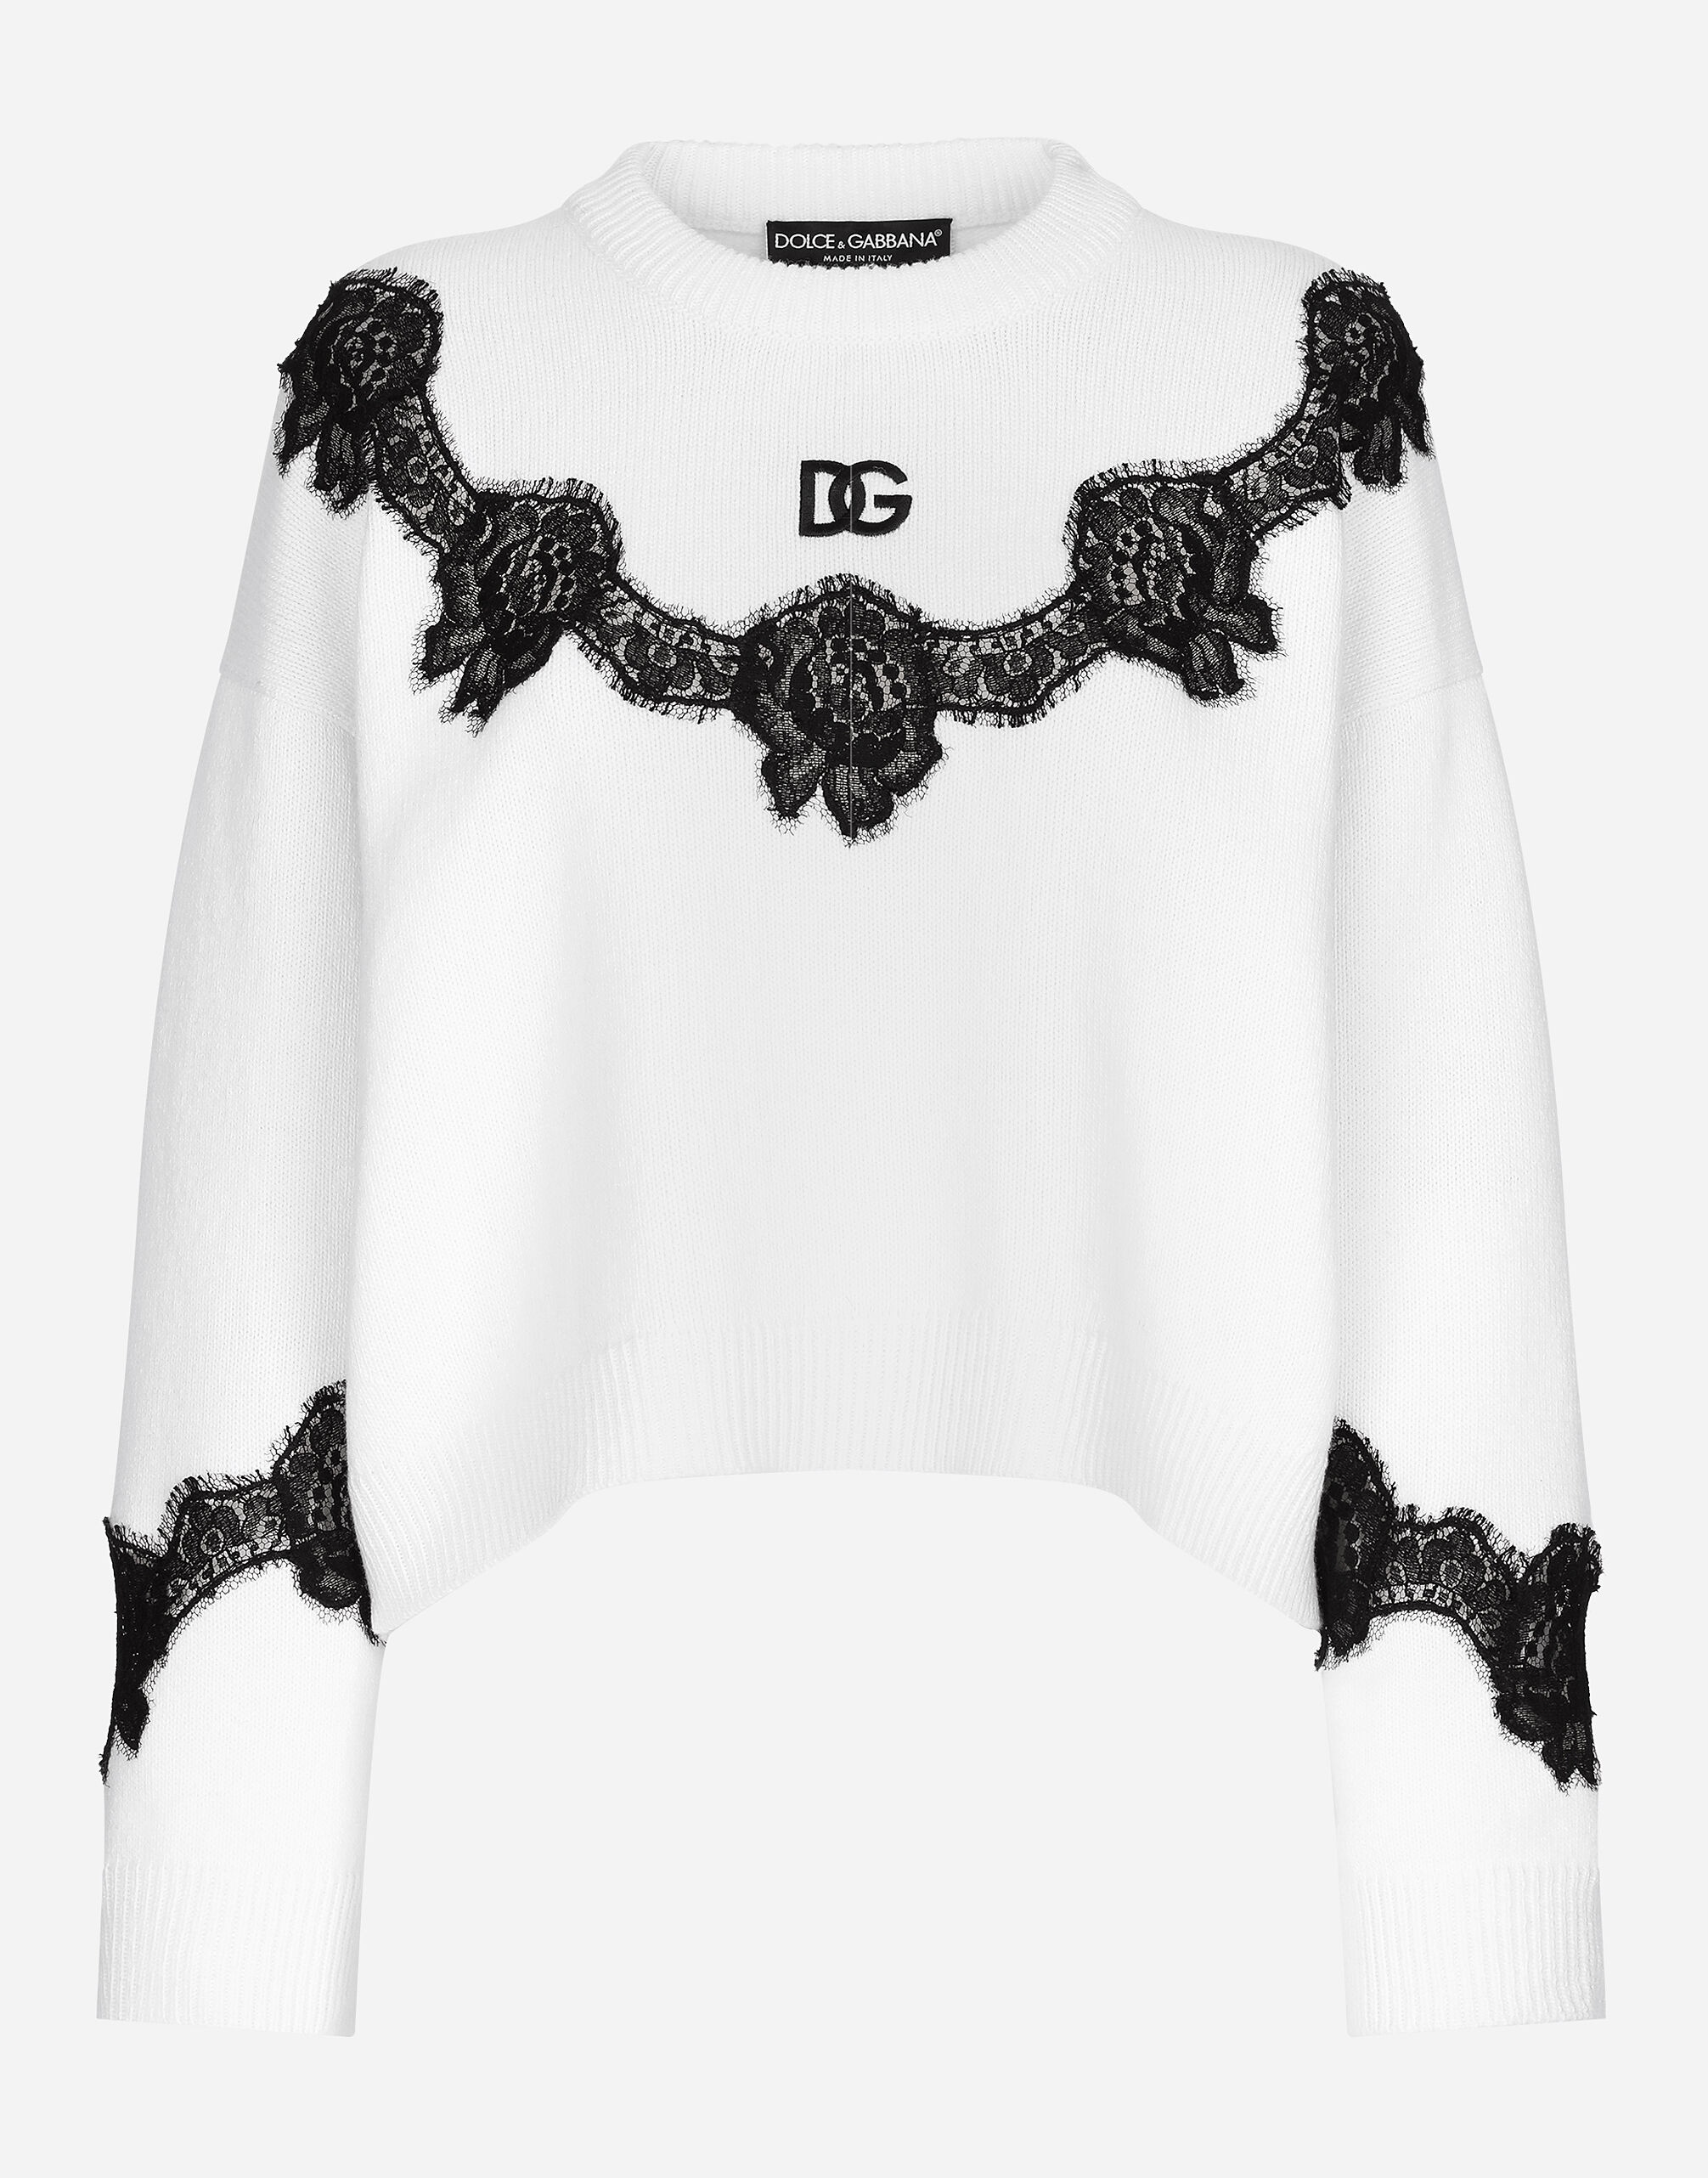 Wool sweater with DG logo and lace inserts - 1